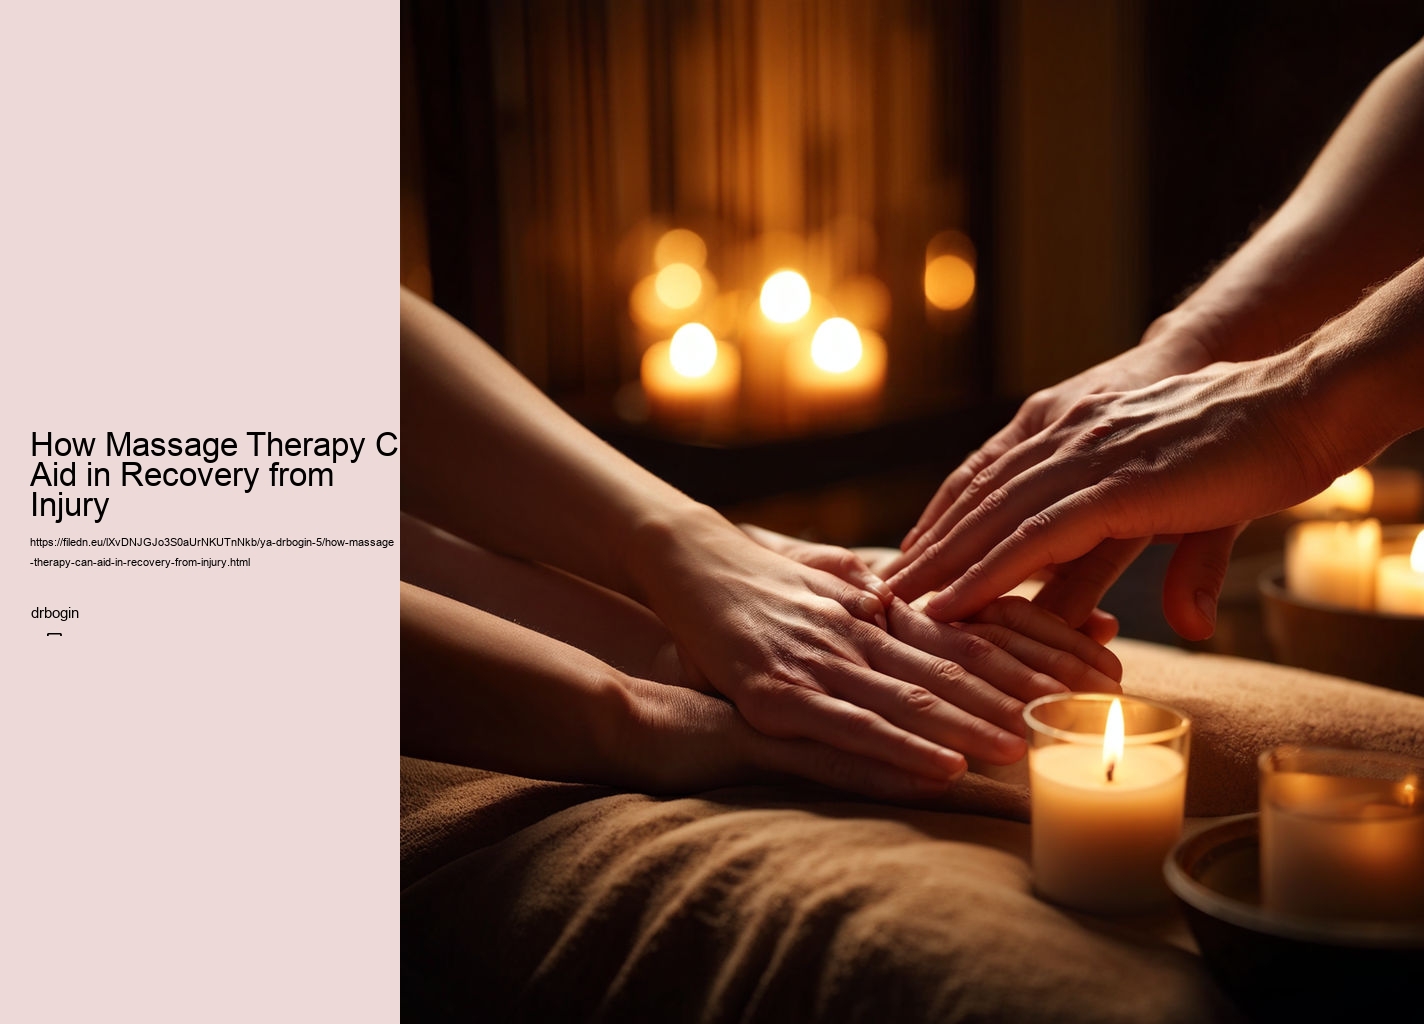 How Massage Therapy Can Aid in Recovery from Injury